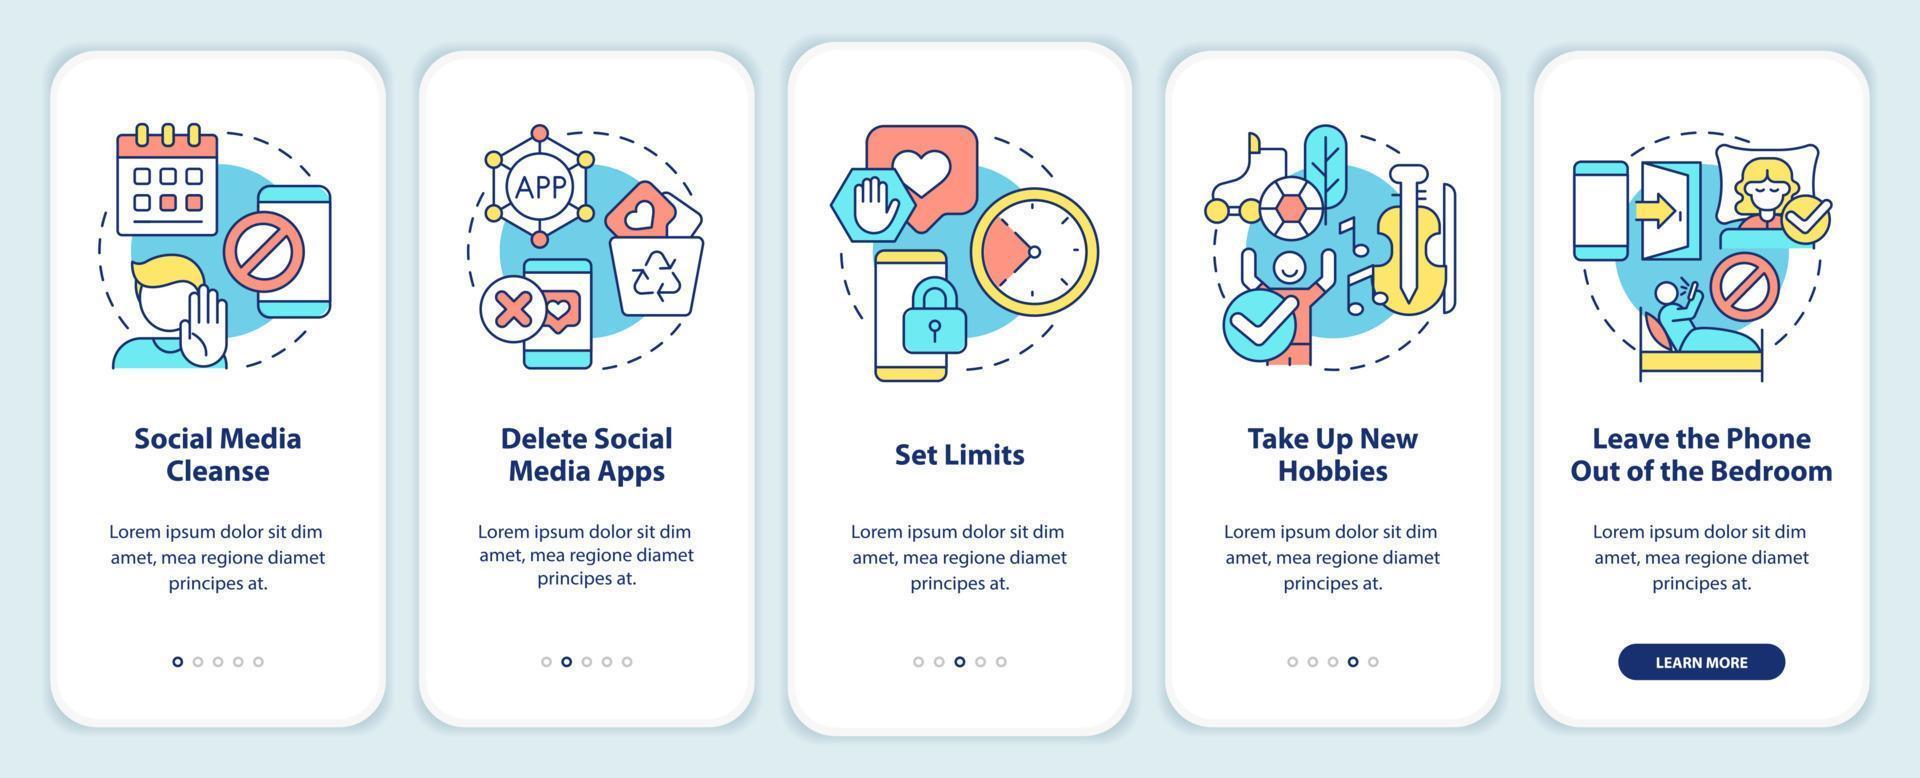 Ways to break social media addiction onboarding mobile app screen. Detox walkthrough 5 steps graphic instructions pages with linear concepts. UI, UX, GUI template. vector